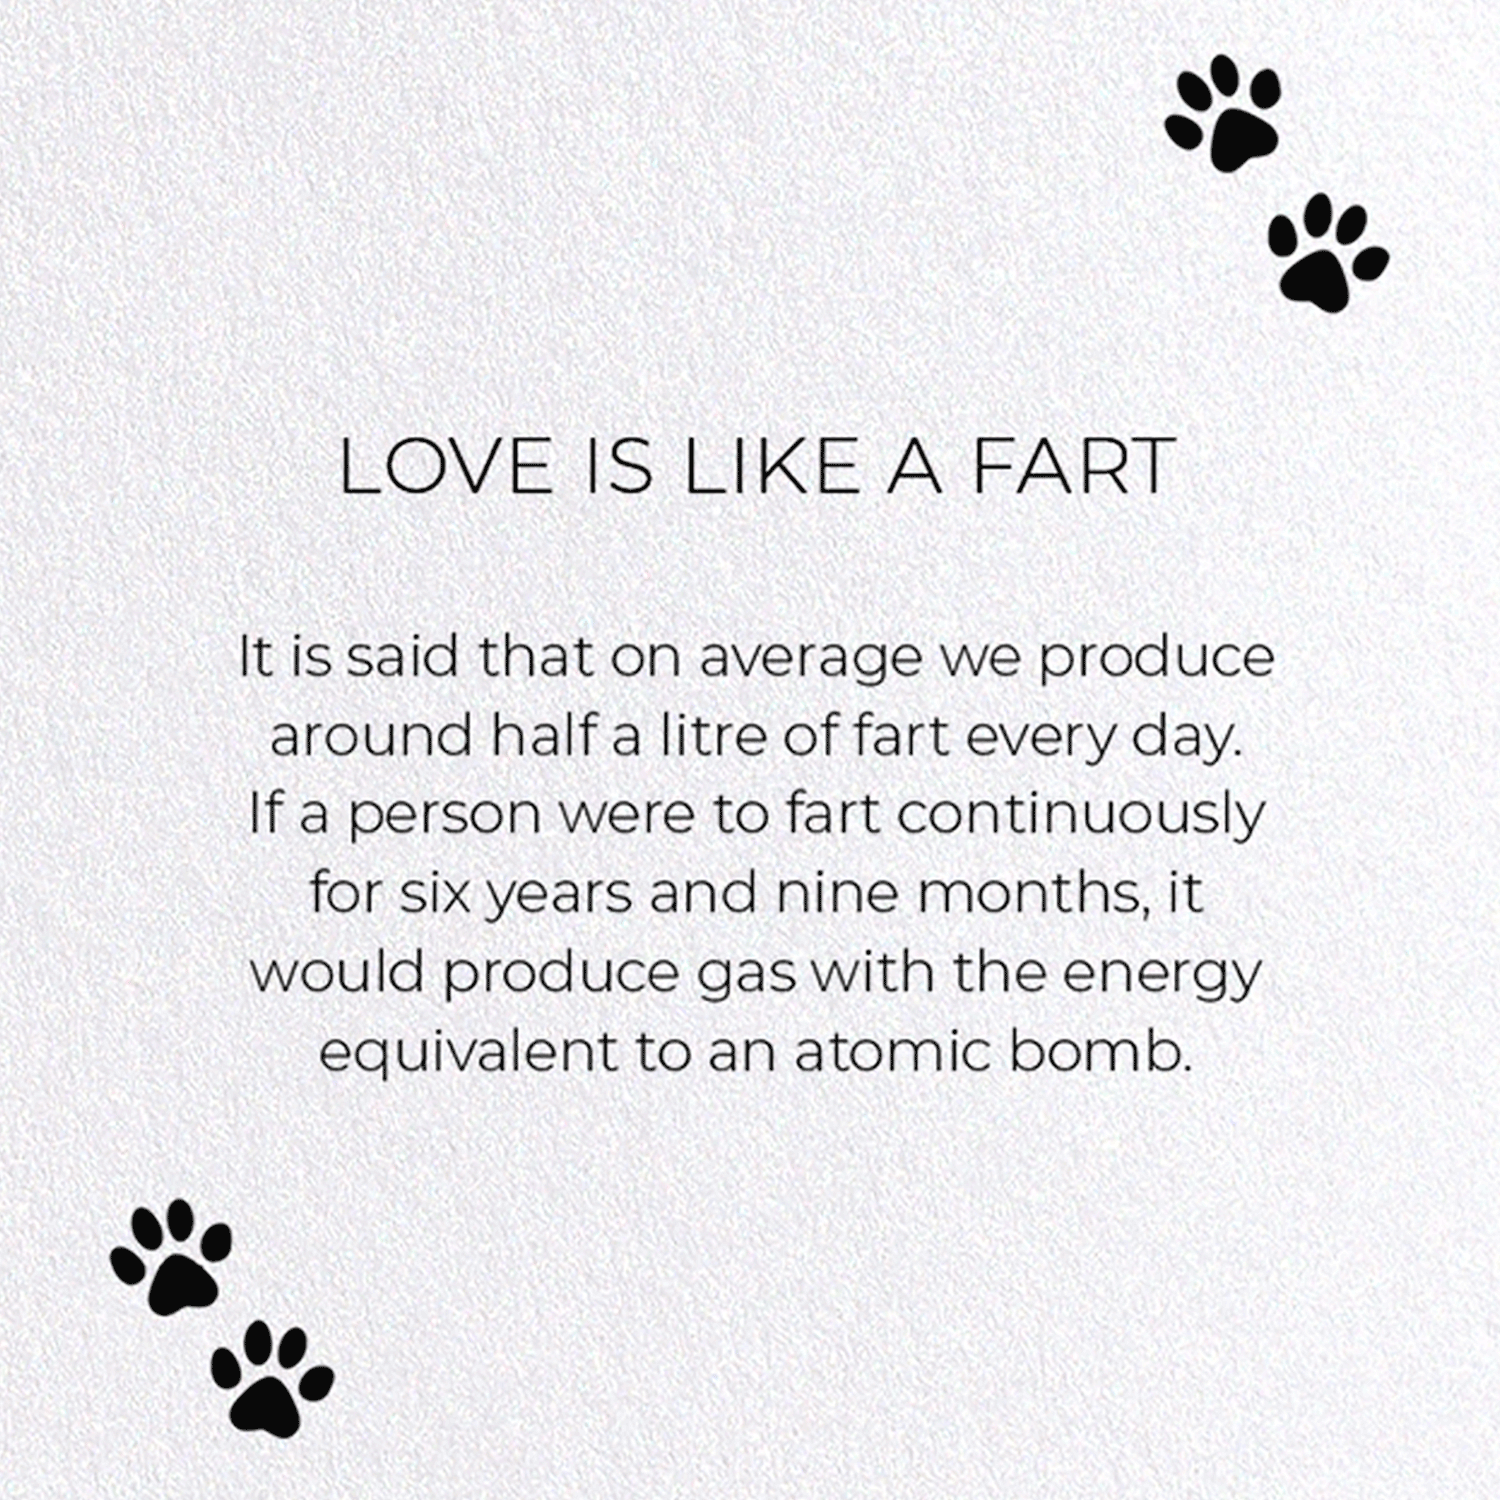 LOVE IS LIKE A FART: Funny Animal Greeting Card